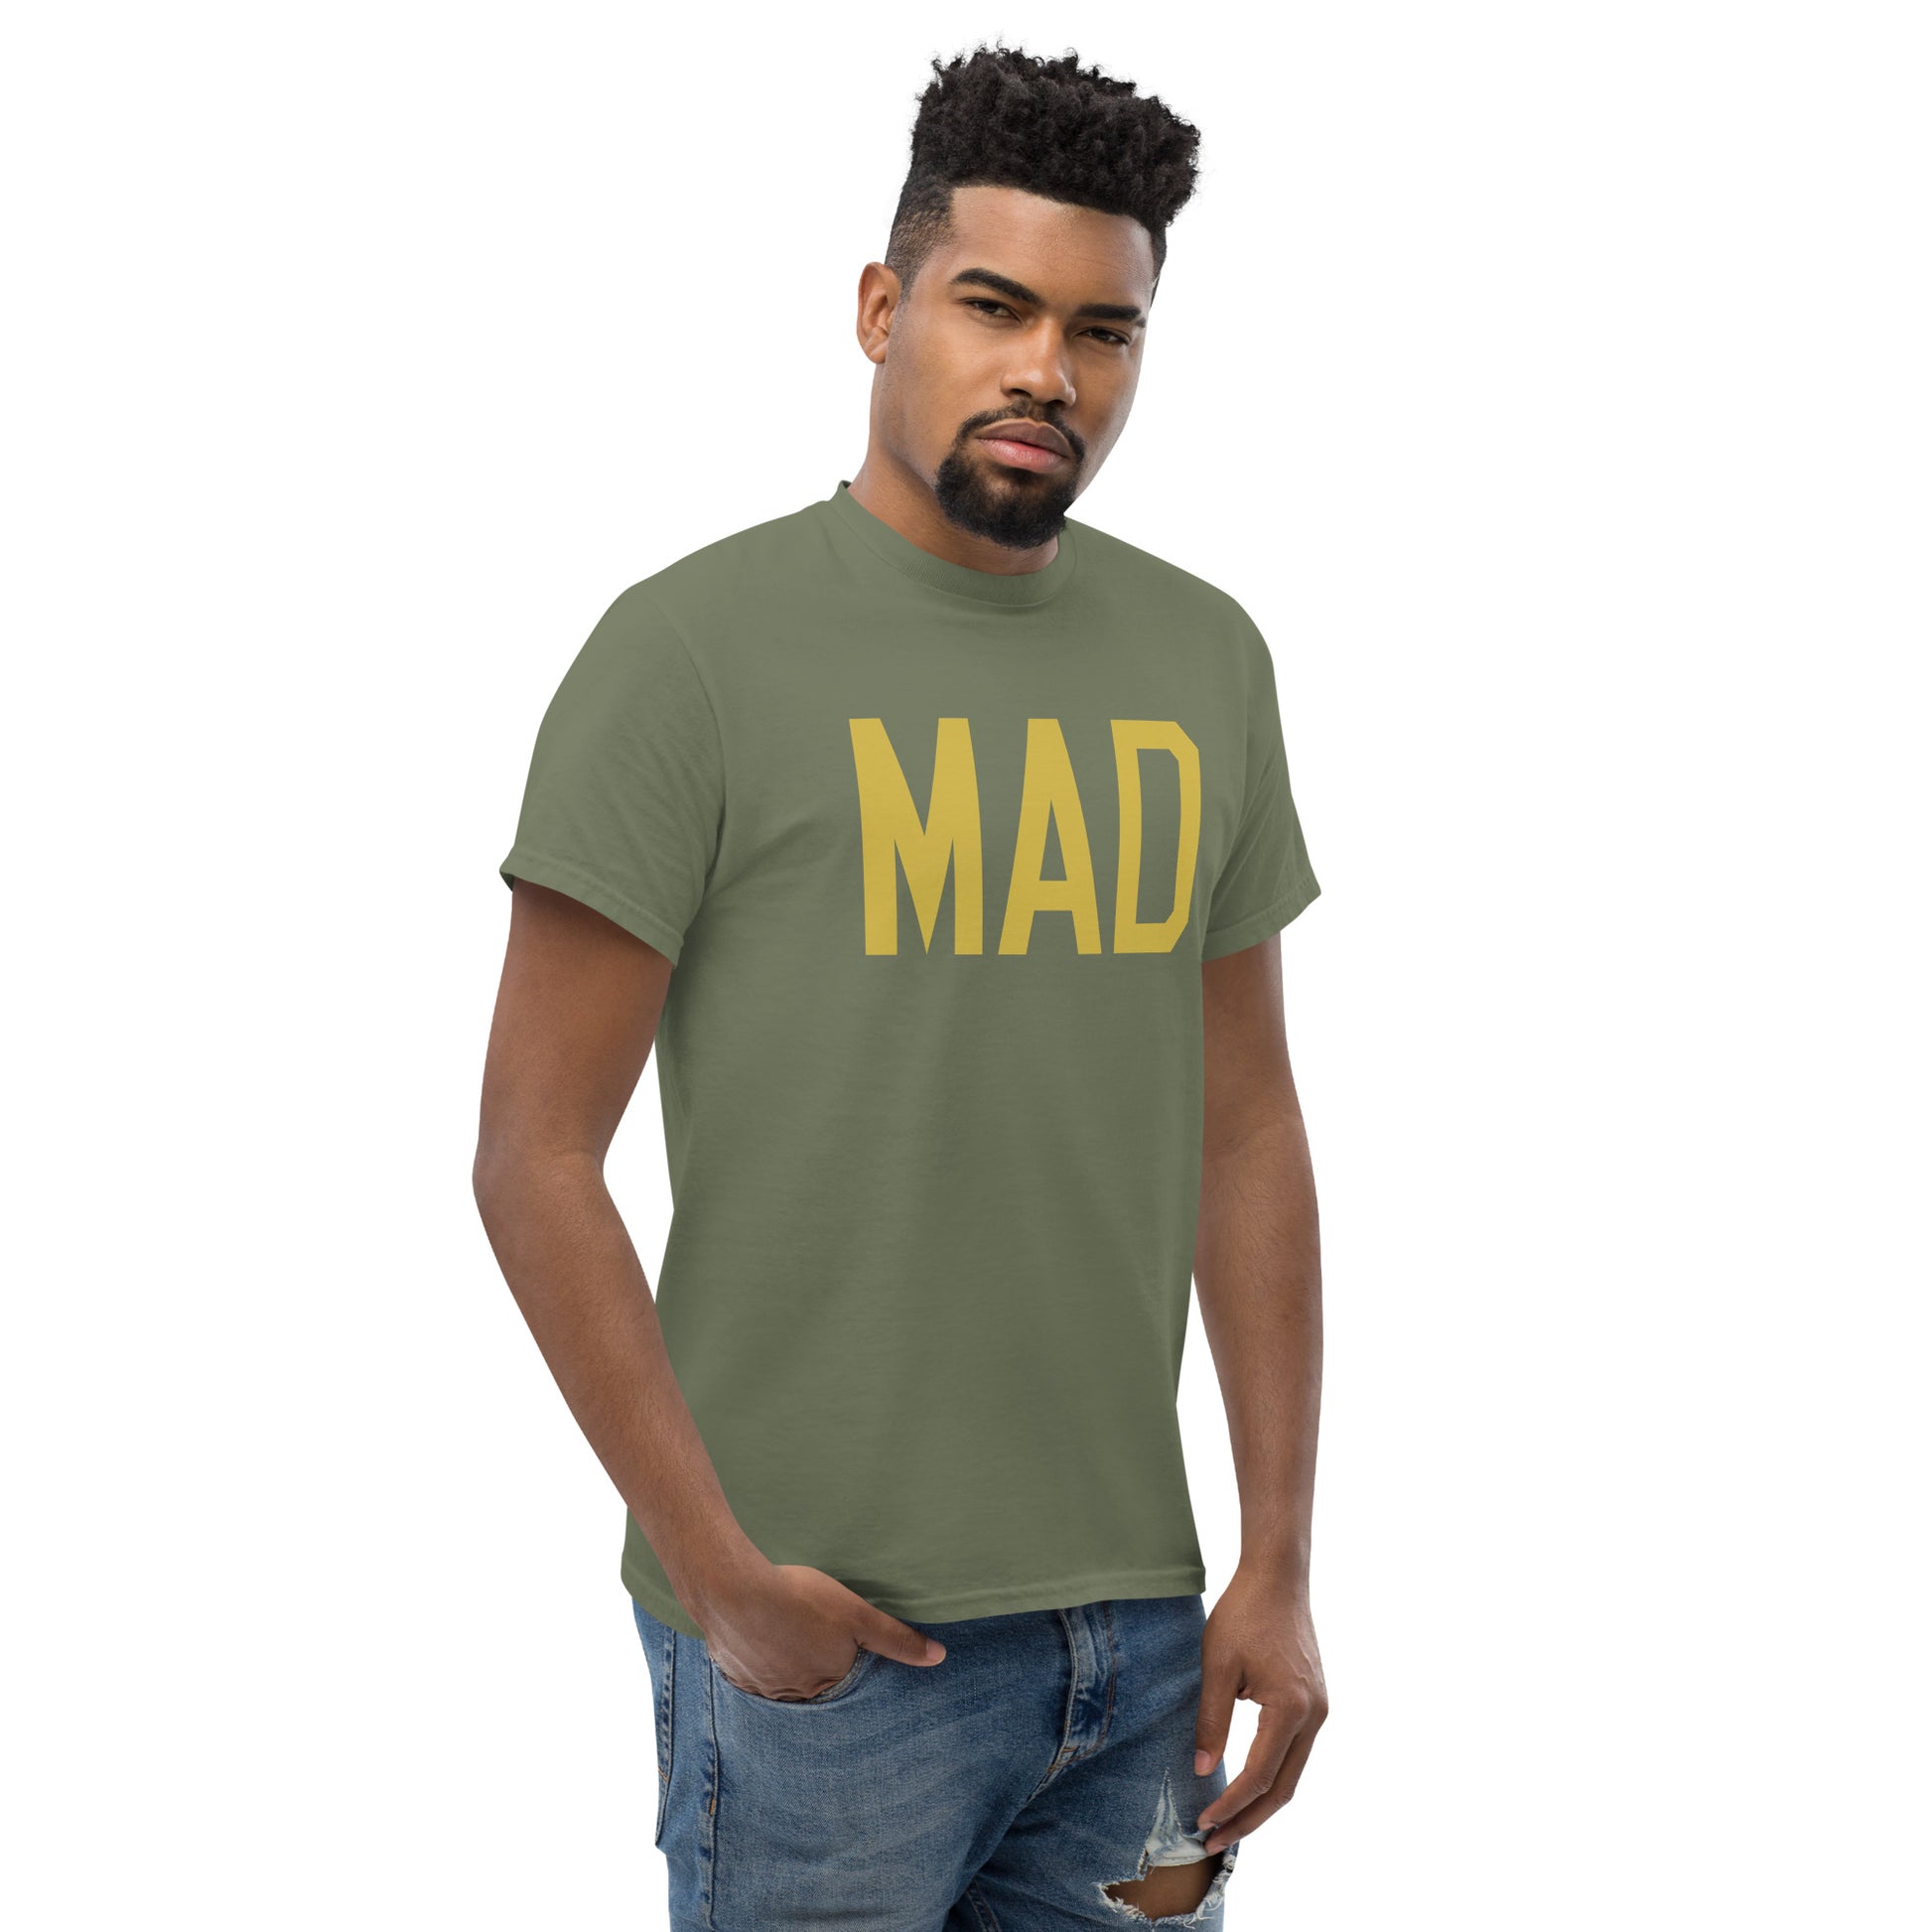 Aviation Enthusiast Men's Tee - Old Gold Graphic • MAD Madrid • YHM Designs - Image 08